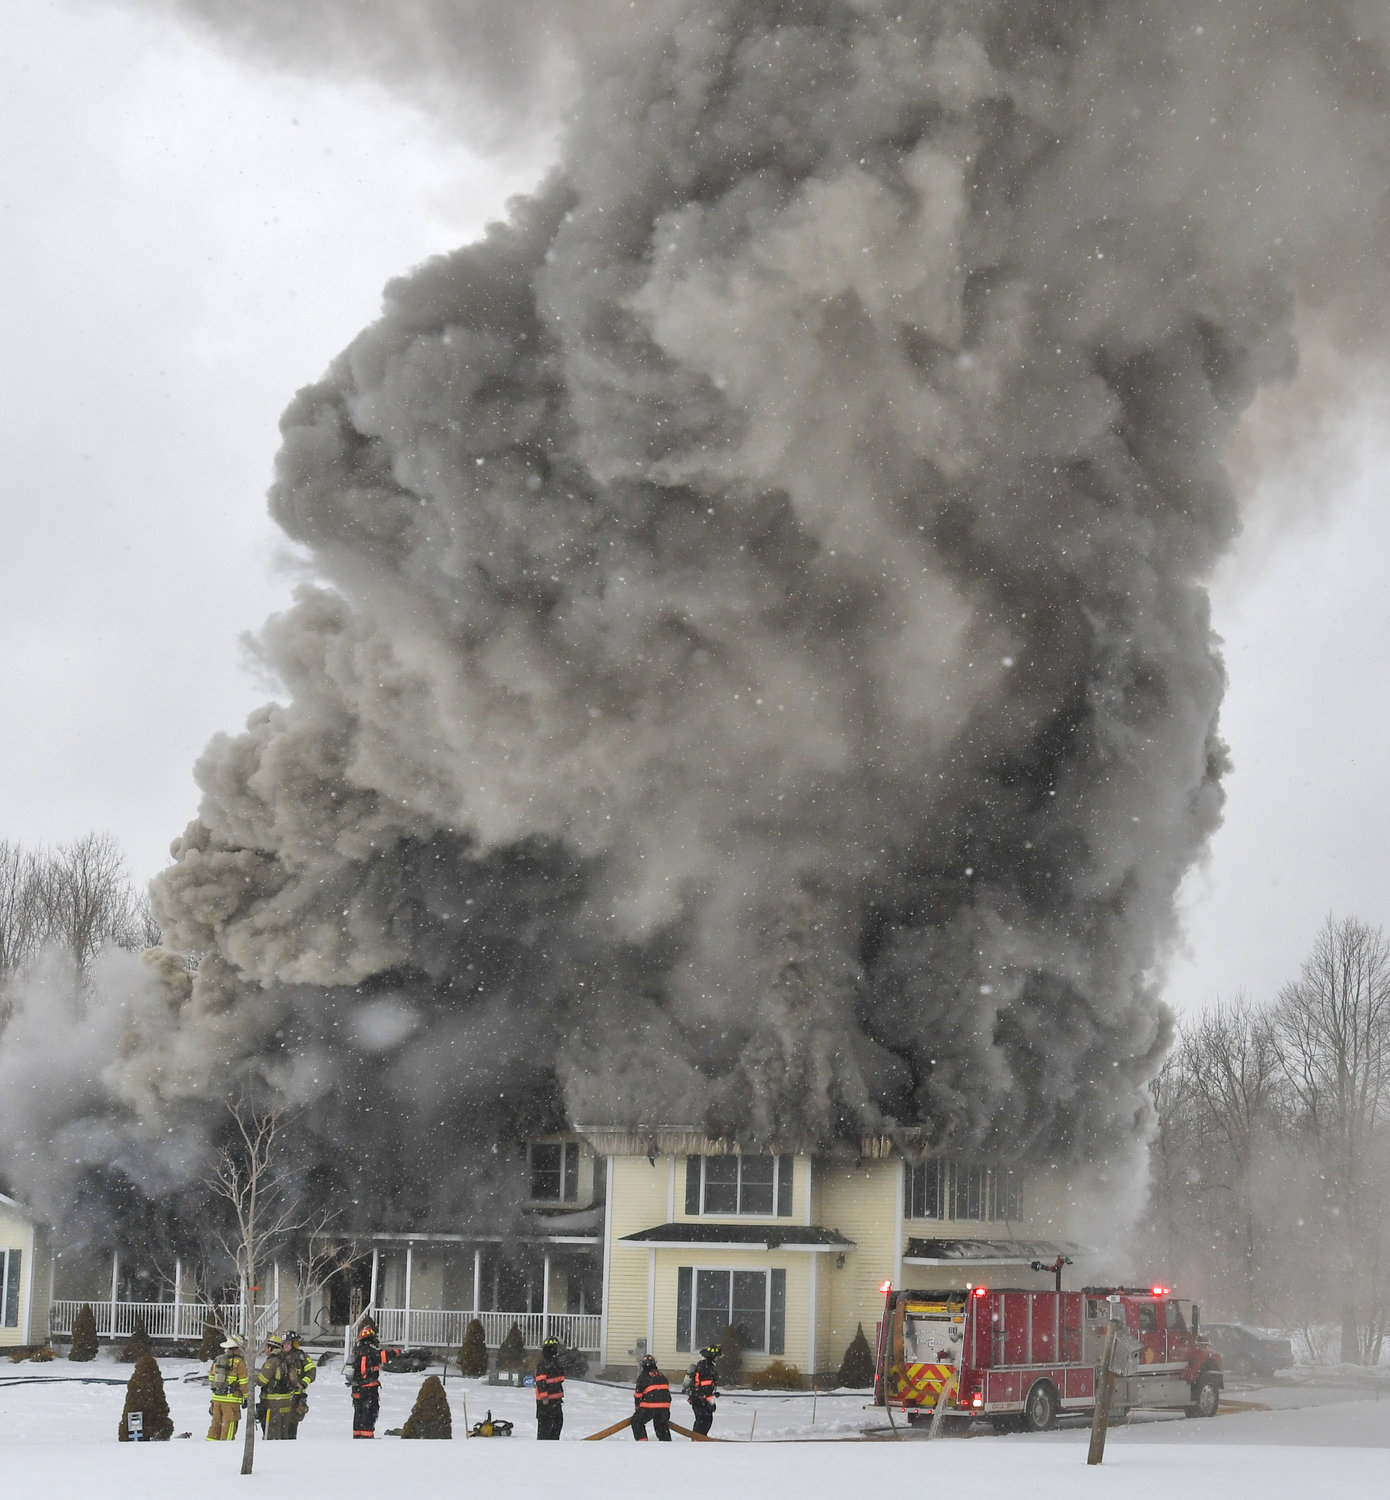 UP IN SMOKE — Smoke billowed from 4327 Wood Creek Road in Verona this morning, as several departments fought a blaze that had crews of local firefighters on the scene for multiple hours.